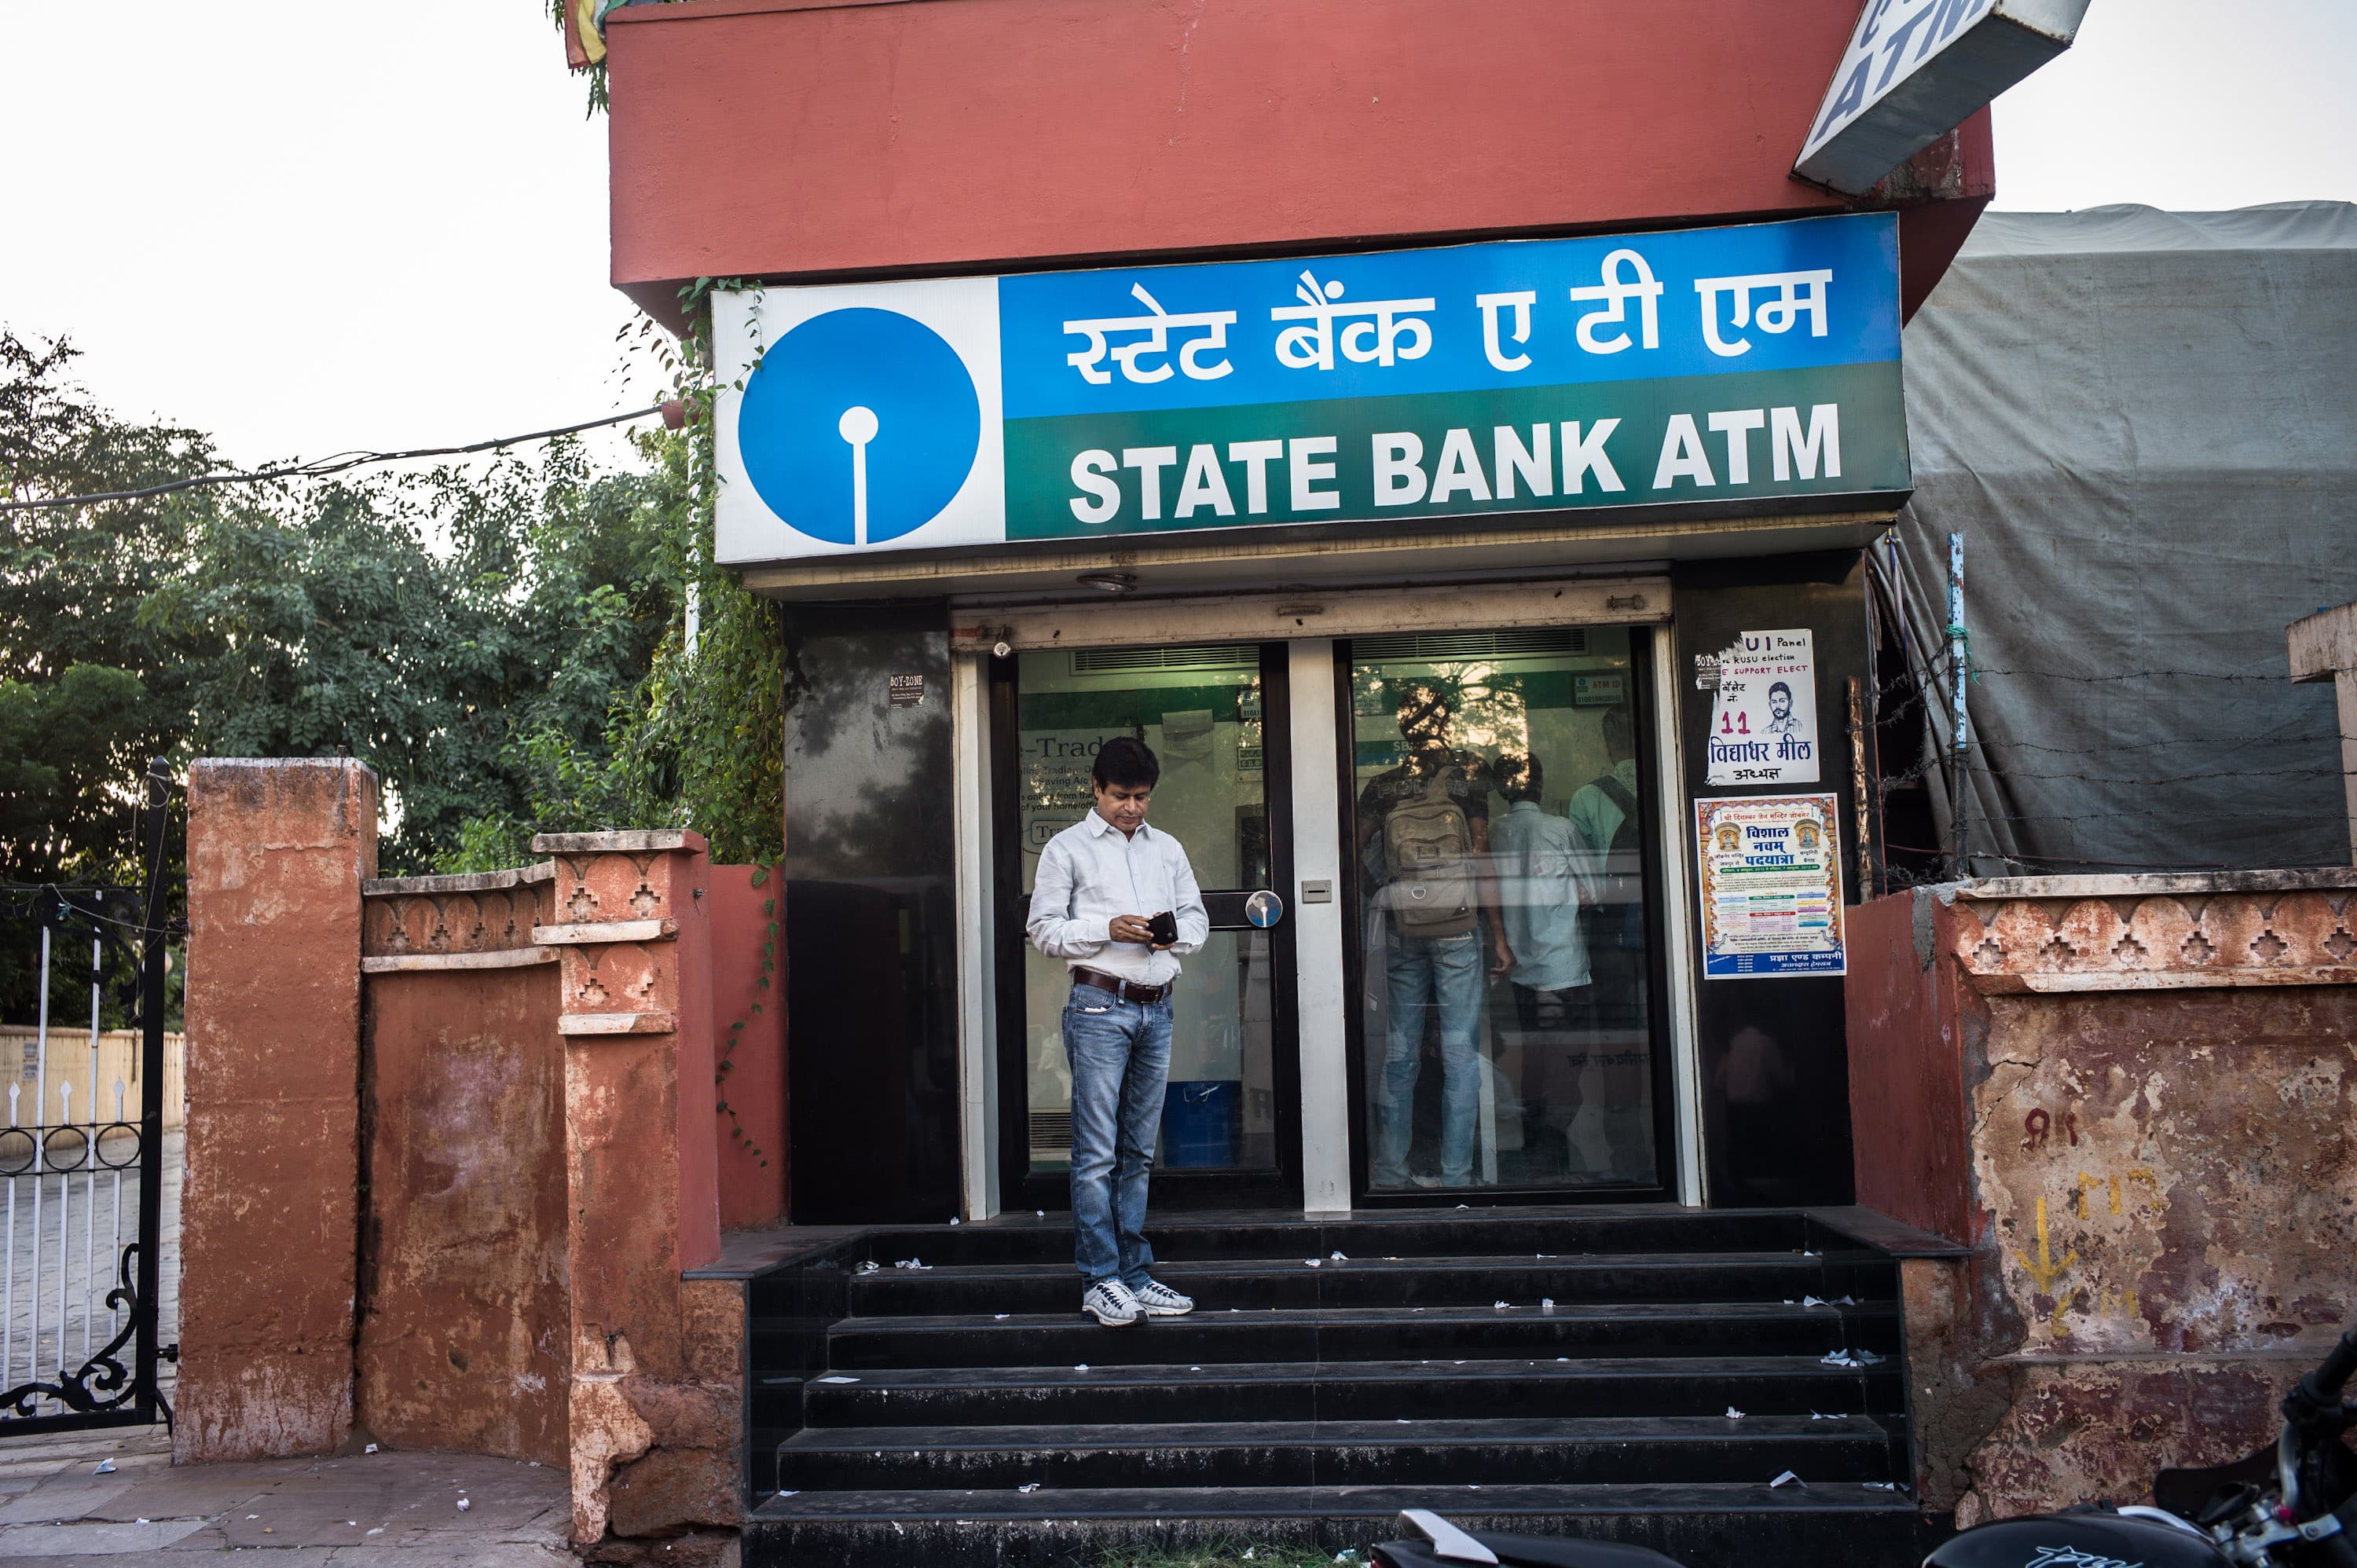 India banking reforms missing recapitalization from government